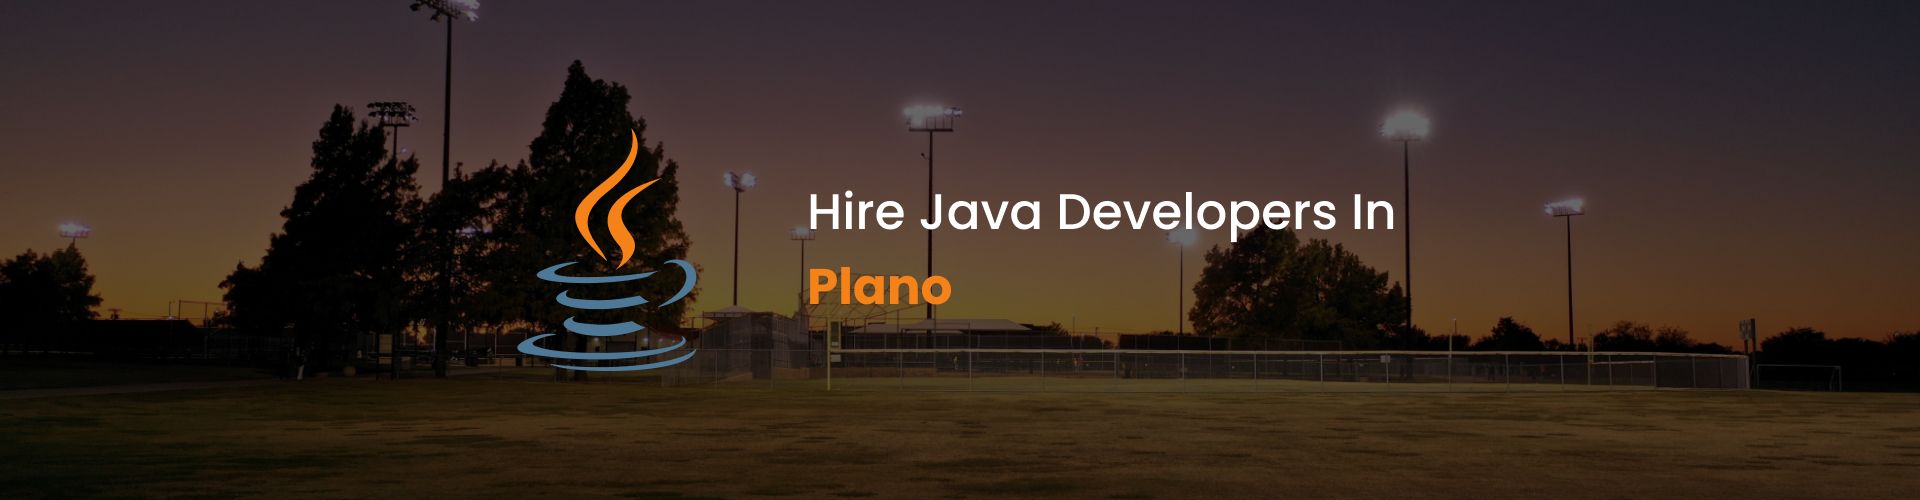 hire java developers in plano